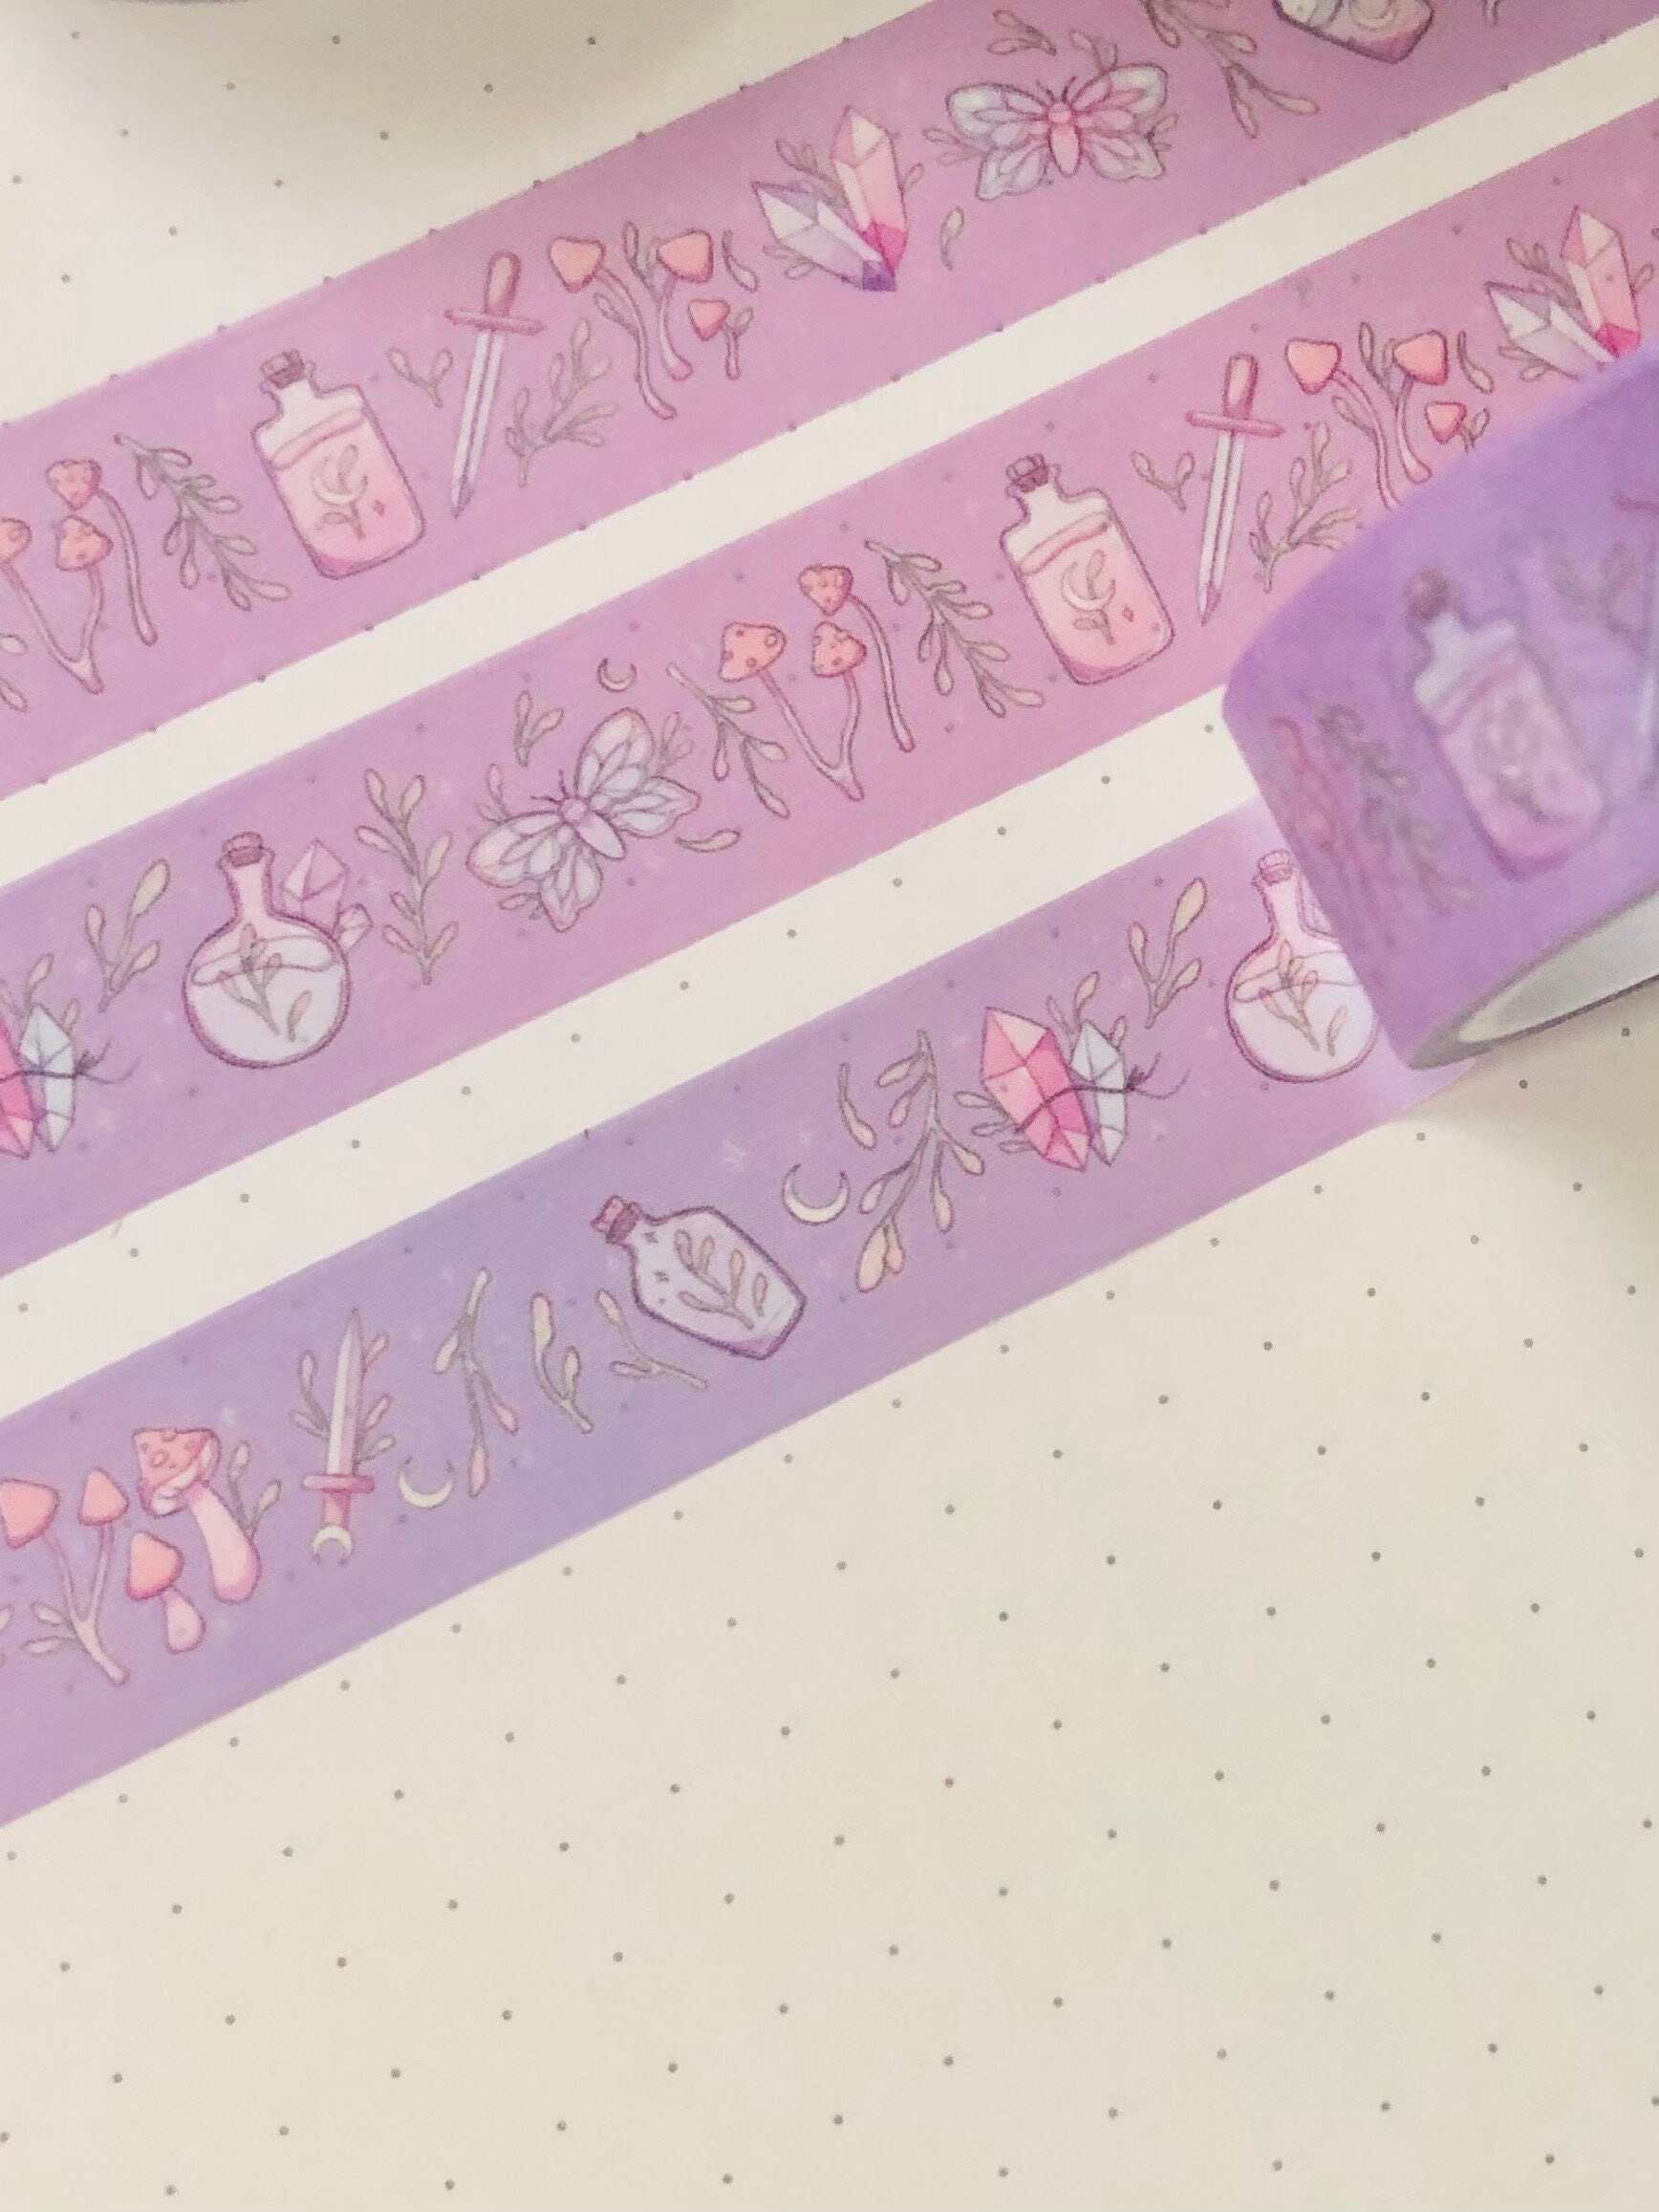 Witchy Washi Tapes Witch Washi Autumn Dark Witch Pastel Kawaii Washi Autumn Washi  Tape Fall Stationery Planner Bullet Journal Bujo 